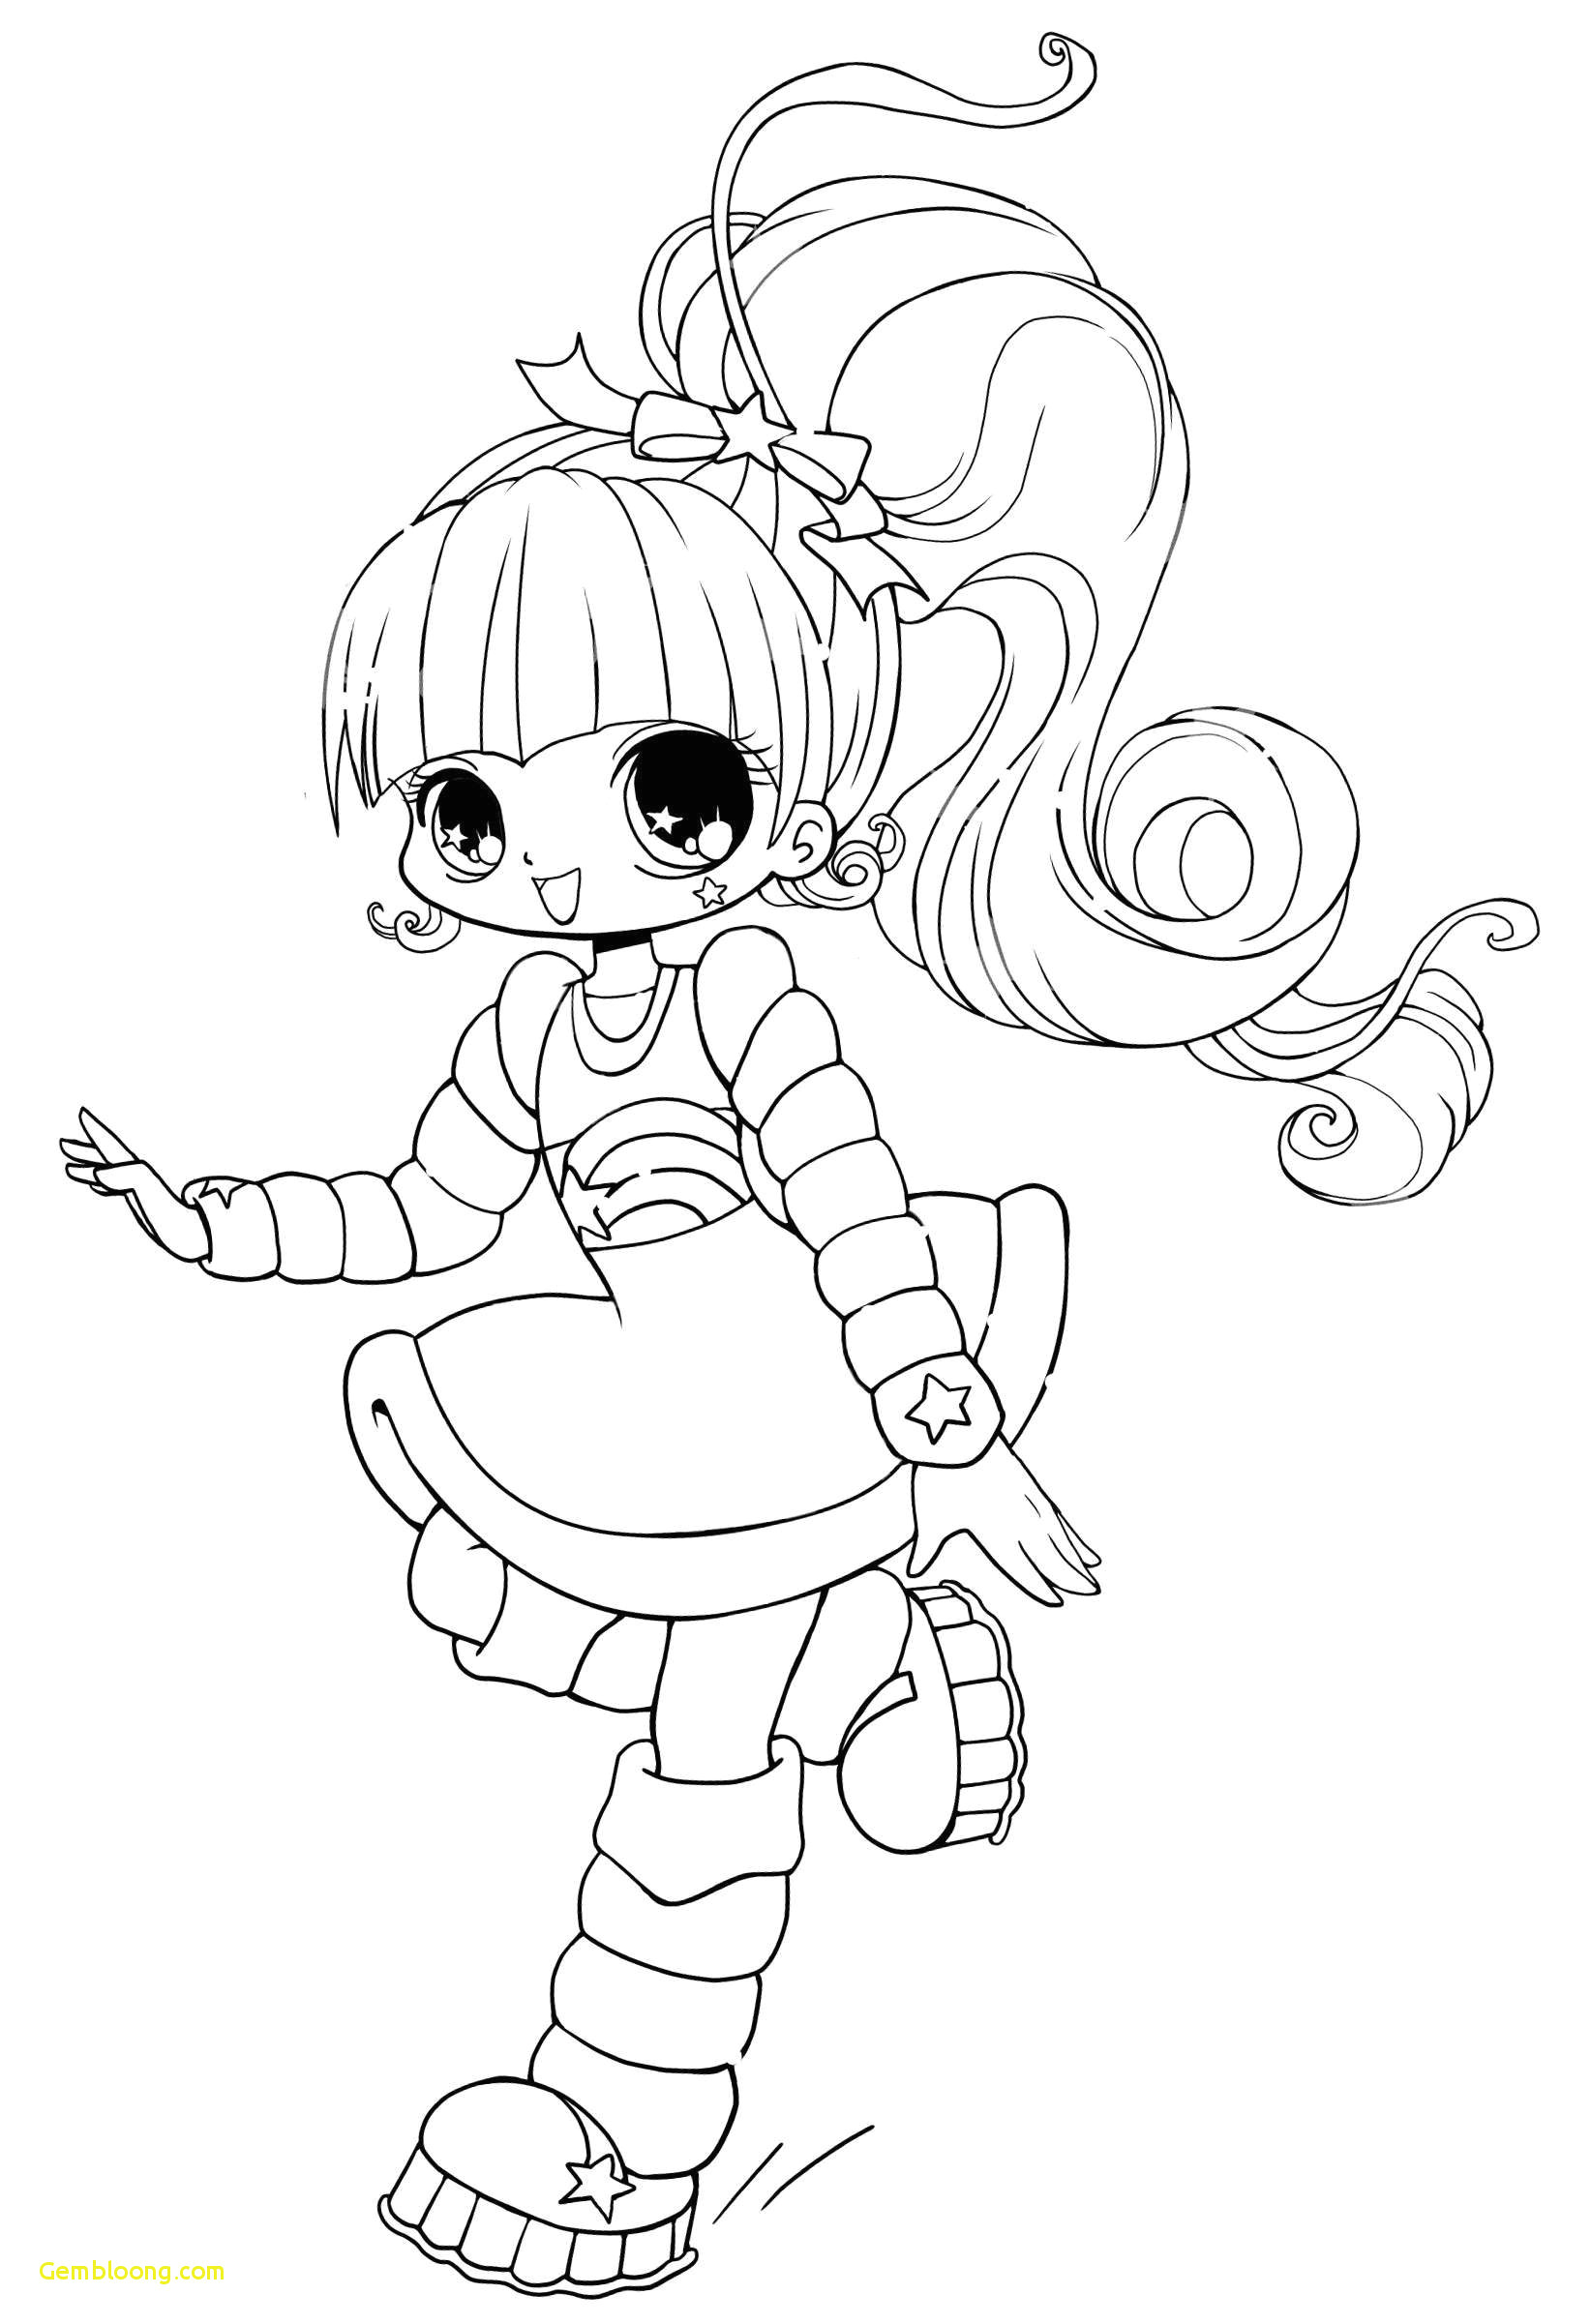 23 anime drawing websites prestigious new cute anime chibi girl coloring pages katesgrove